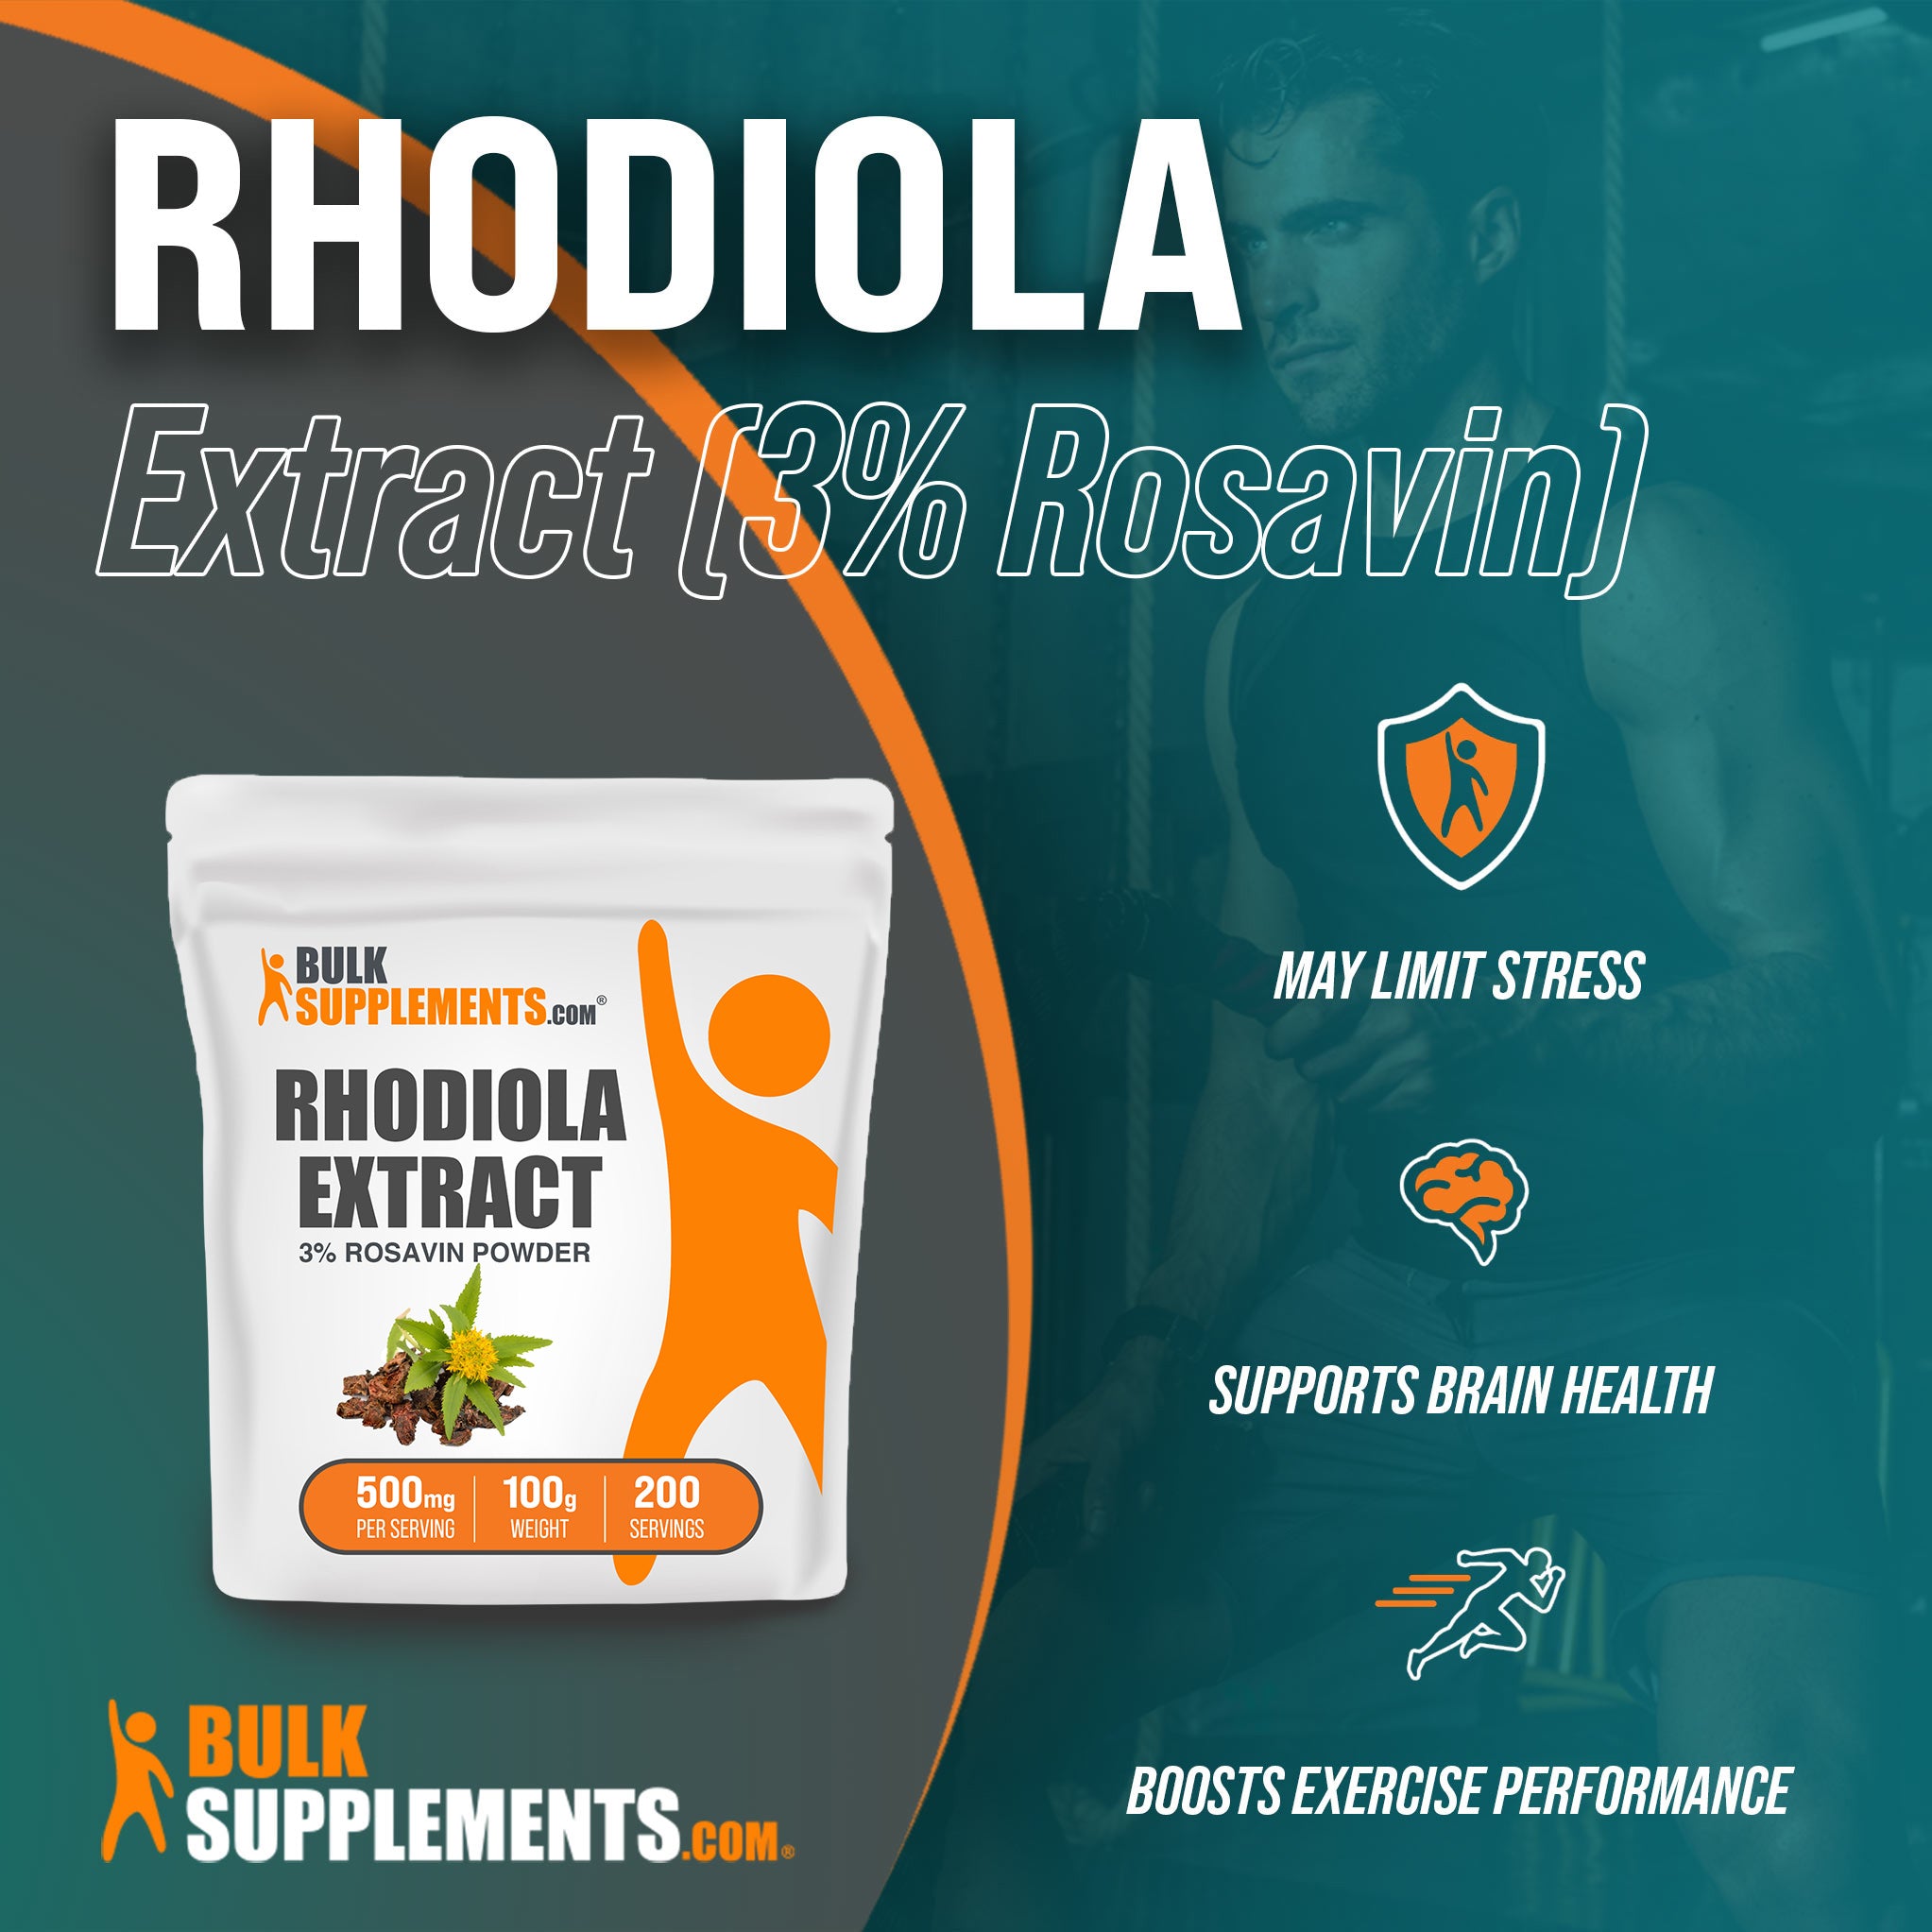 Benefits of Rhodiola Extract 3% Rosavin: may limit stress, supports brain health, boosts exercise performance